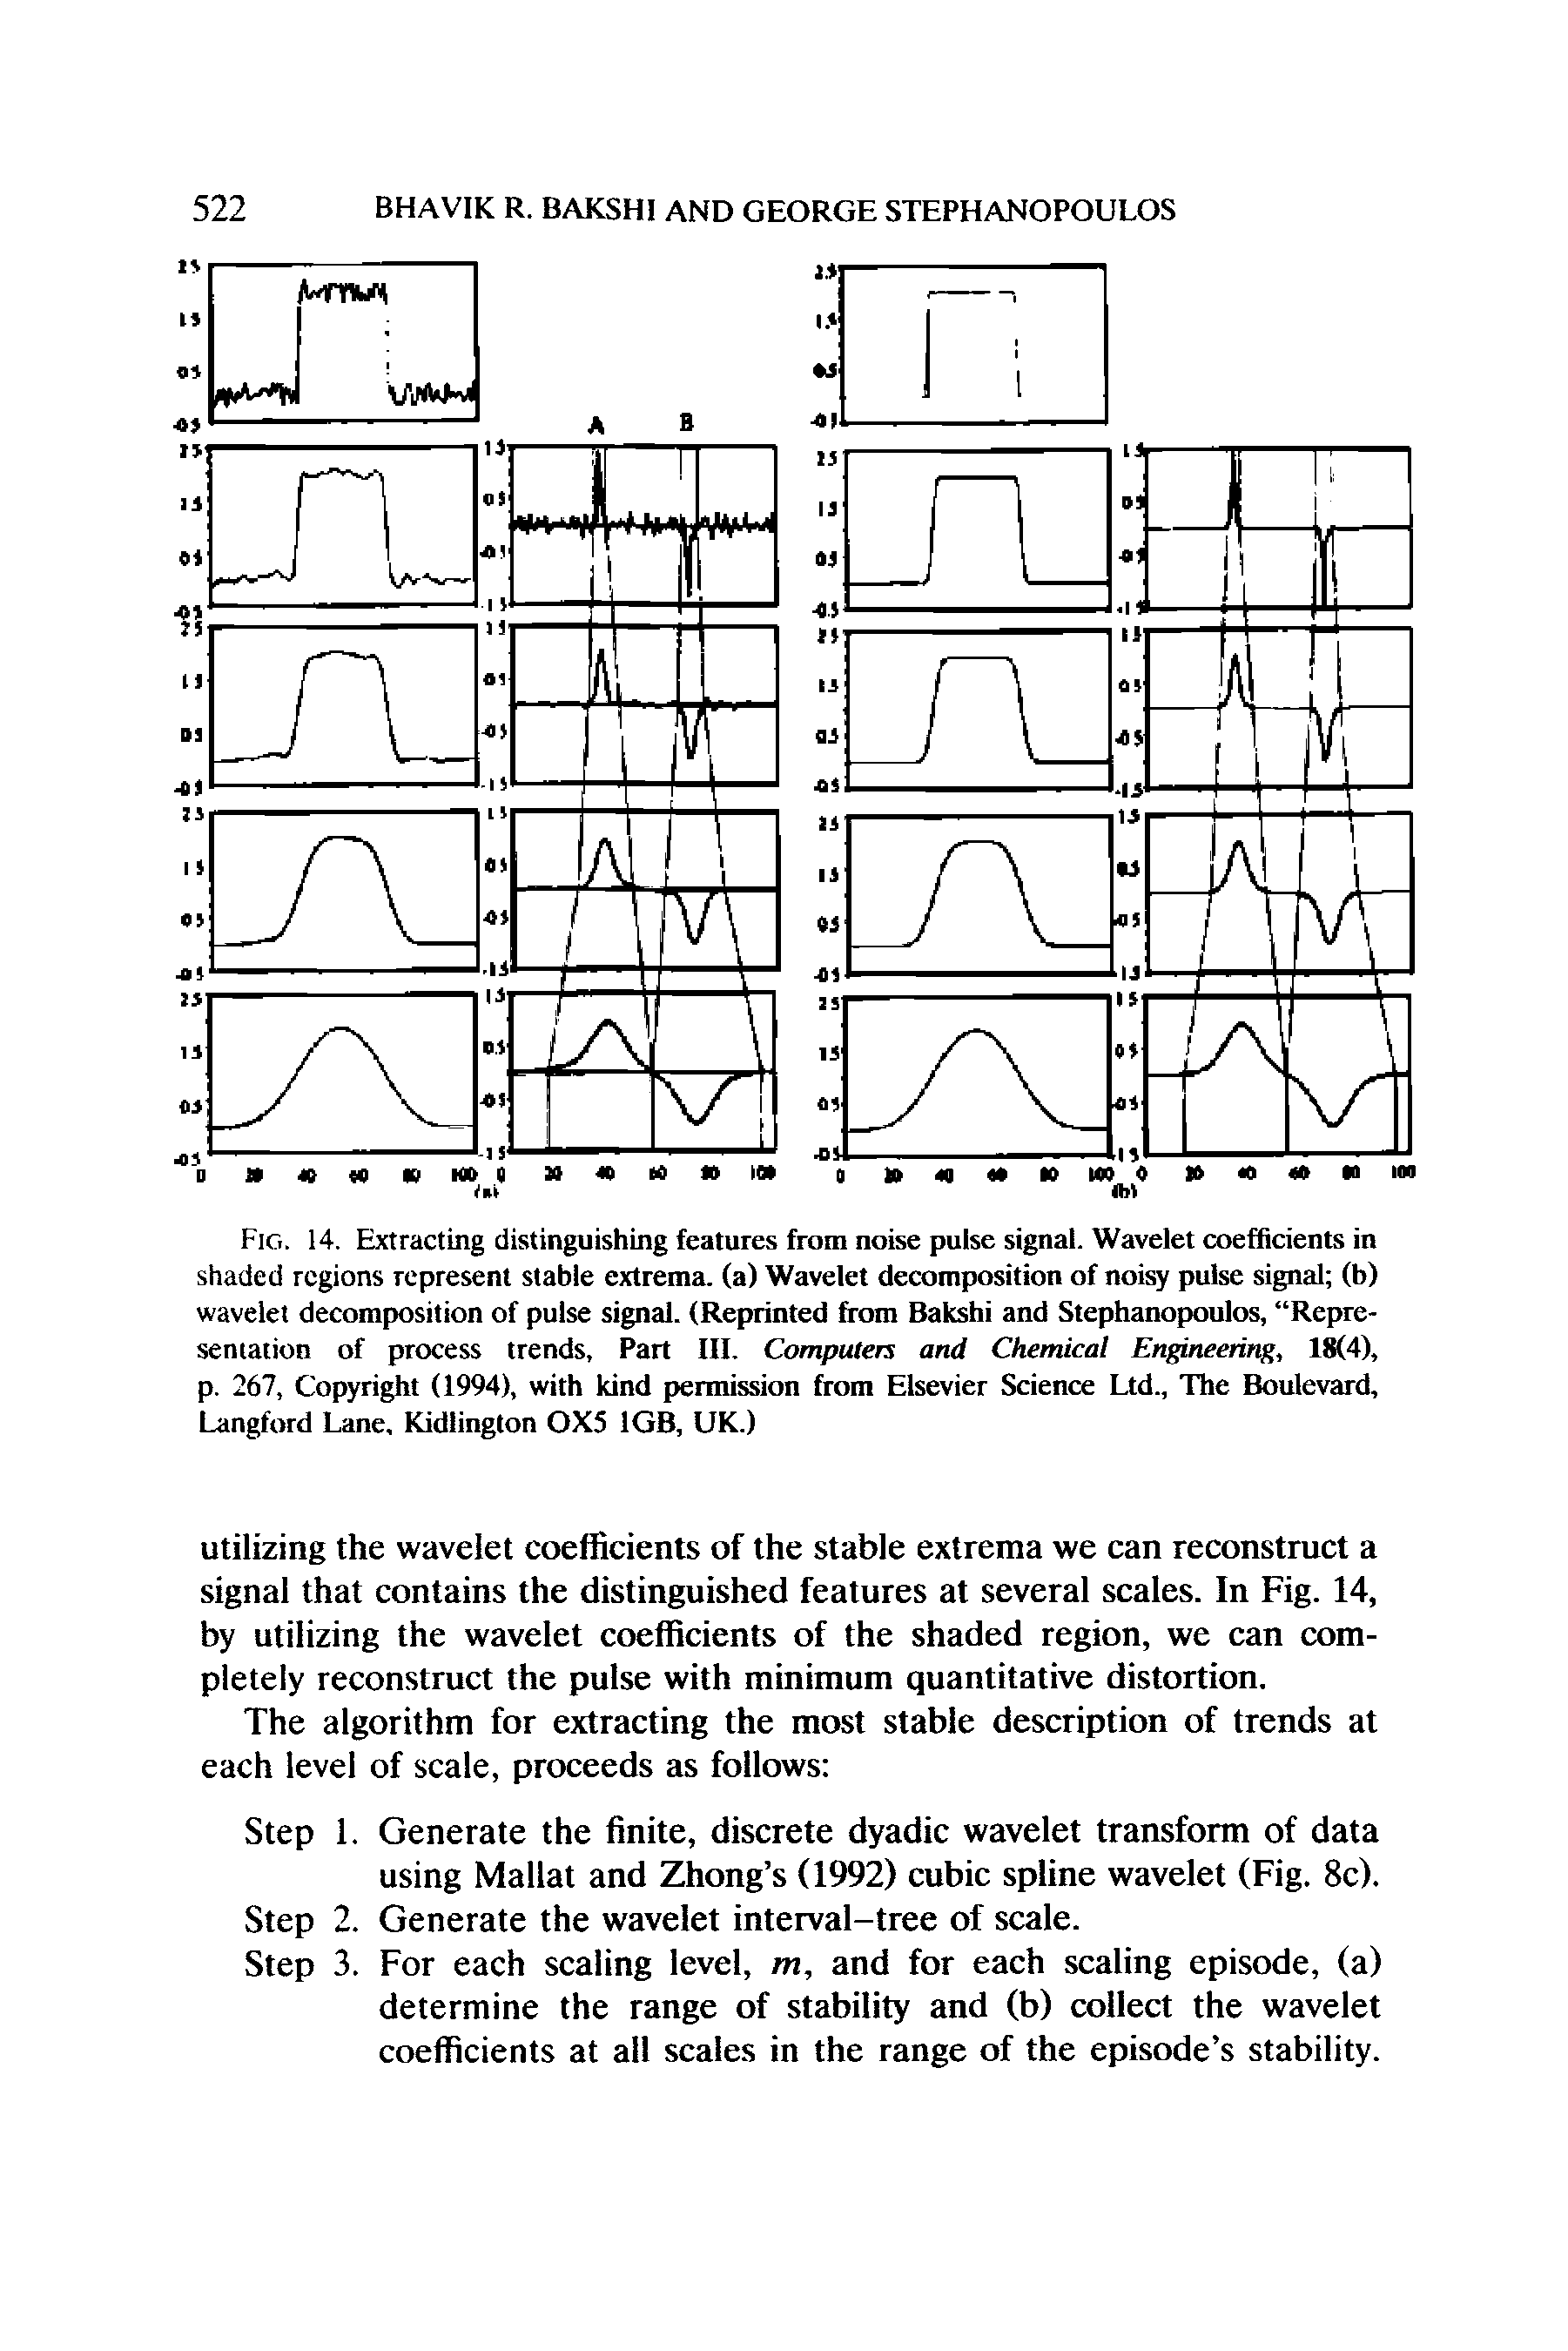 Fig. 14. Esxtracting distinguishing features from noise pulse signal. Wavelet coefficients in shaded regions represent stable extrema, (a) Wavelet decomposition of noisy pulse signal (b) wavelet decomposition of pulse signal. (Reprinted from Bakshi and Stephanopoulos, Representation of process trends. Part III. Computers and Chemical Engineering, 18(4), p. 267, Copyright (1994), with kind permission from Elsevier Science Ltd., The Boulevard, Langford Lane, Kidlington 0X5 1GB, UK.)...